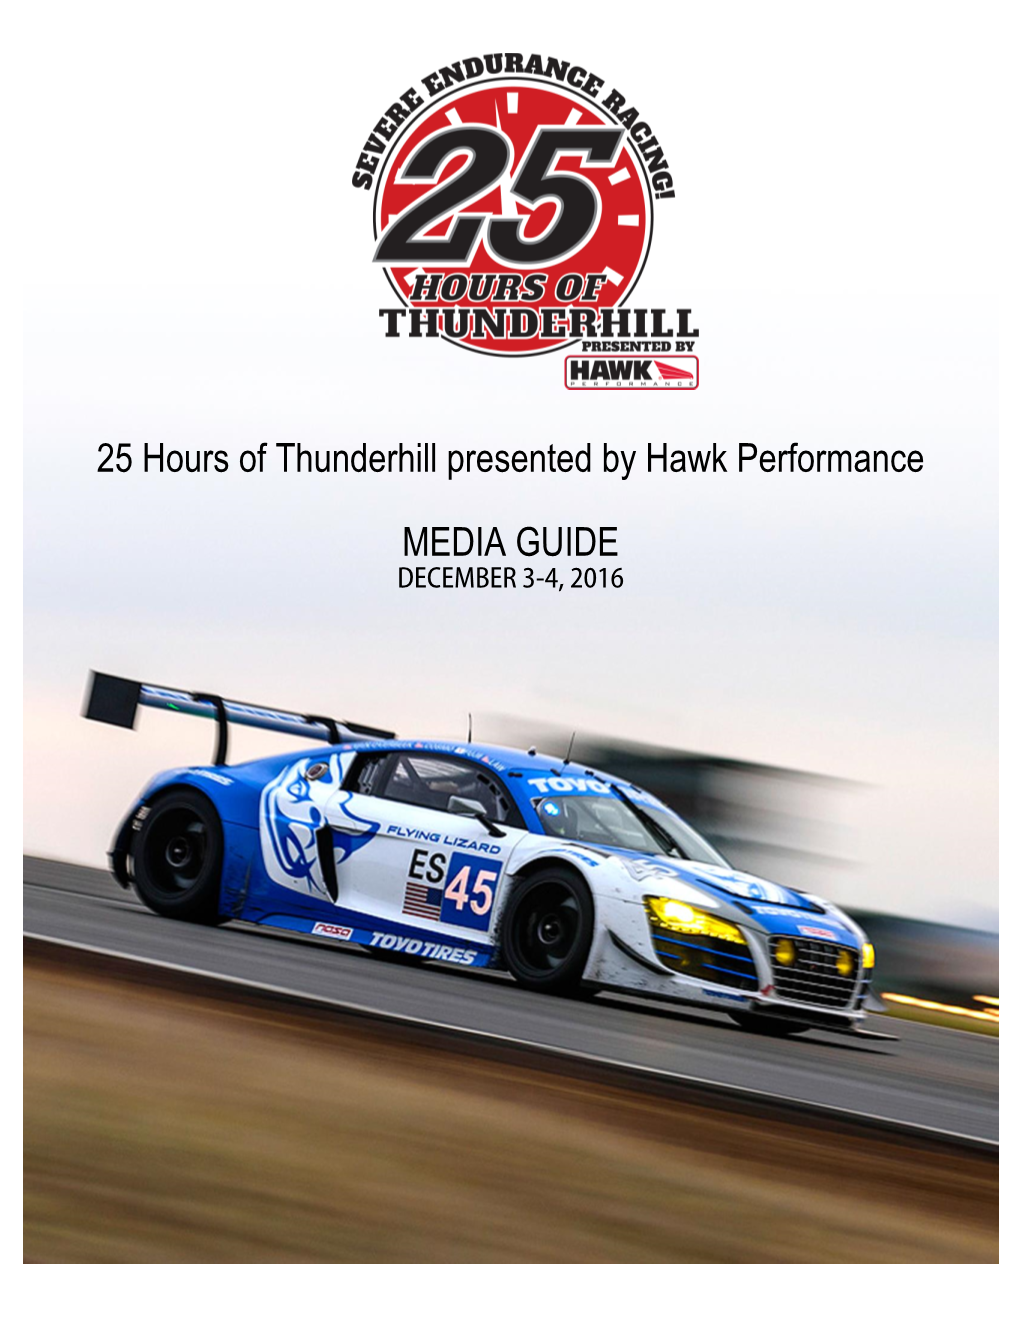 MEDIA GUIDE DECEMBER 3-4, 2016 2016 25 Hours of Thunderhill Presented by Hawk Performance Media Guide